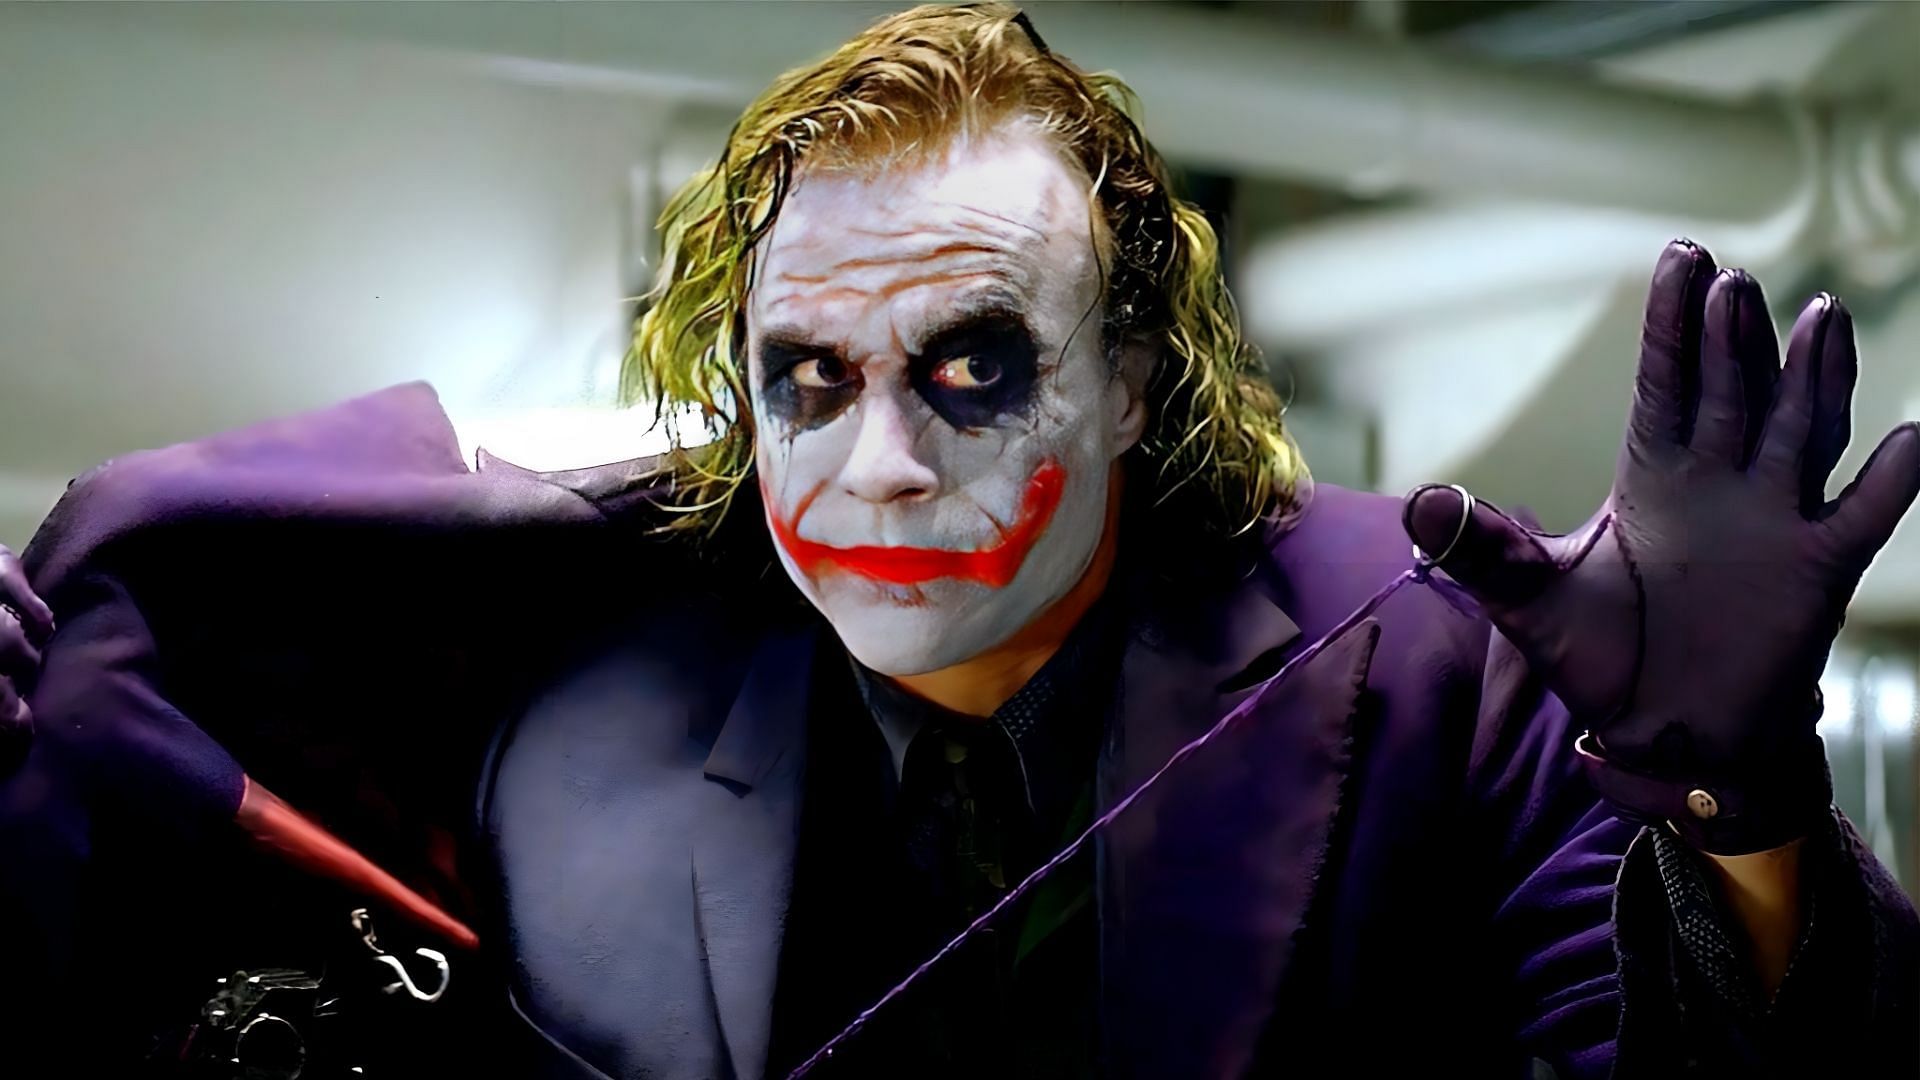 The Joker is widely regarded as one of the best DC villains in the entire franchise. (Image via DC)